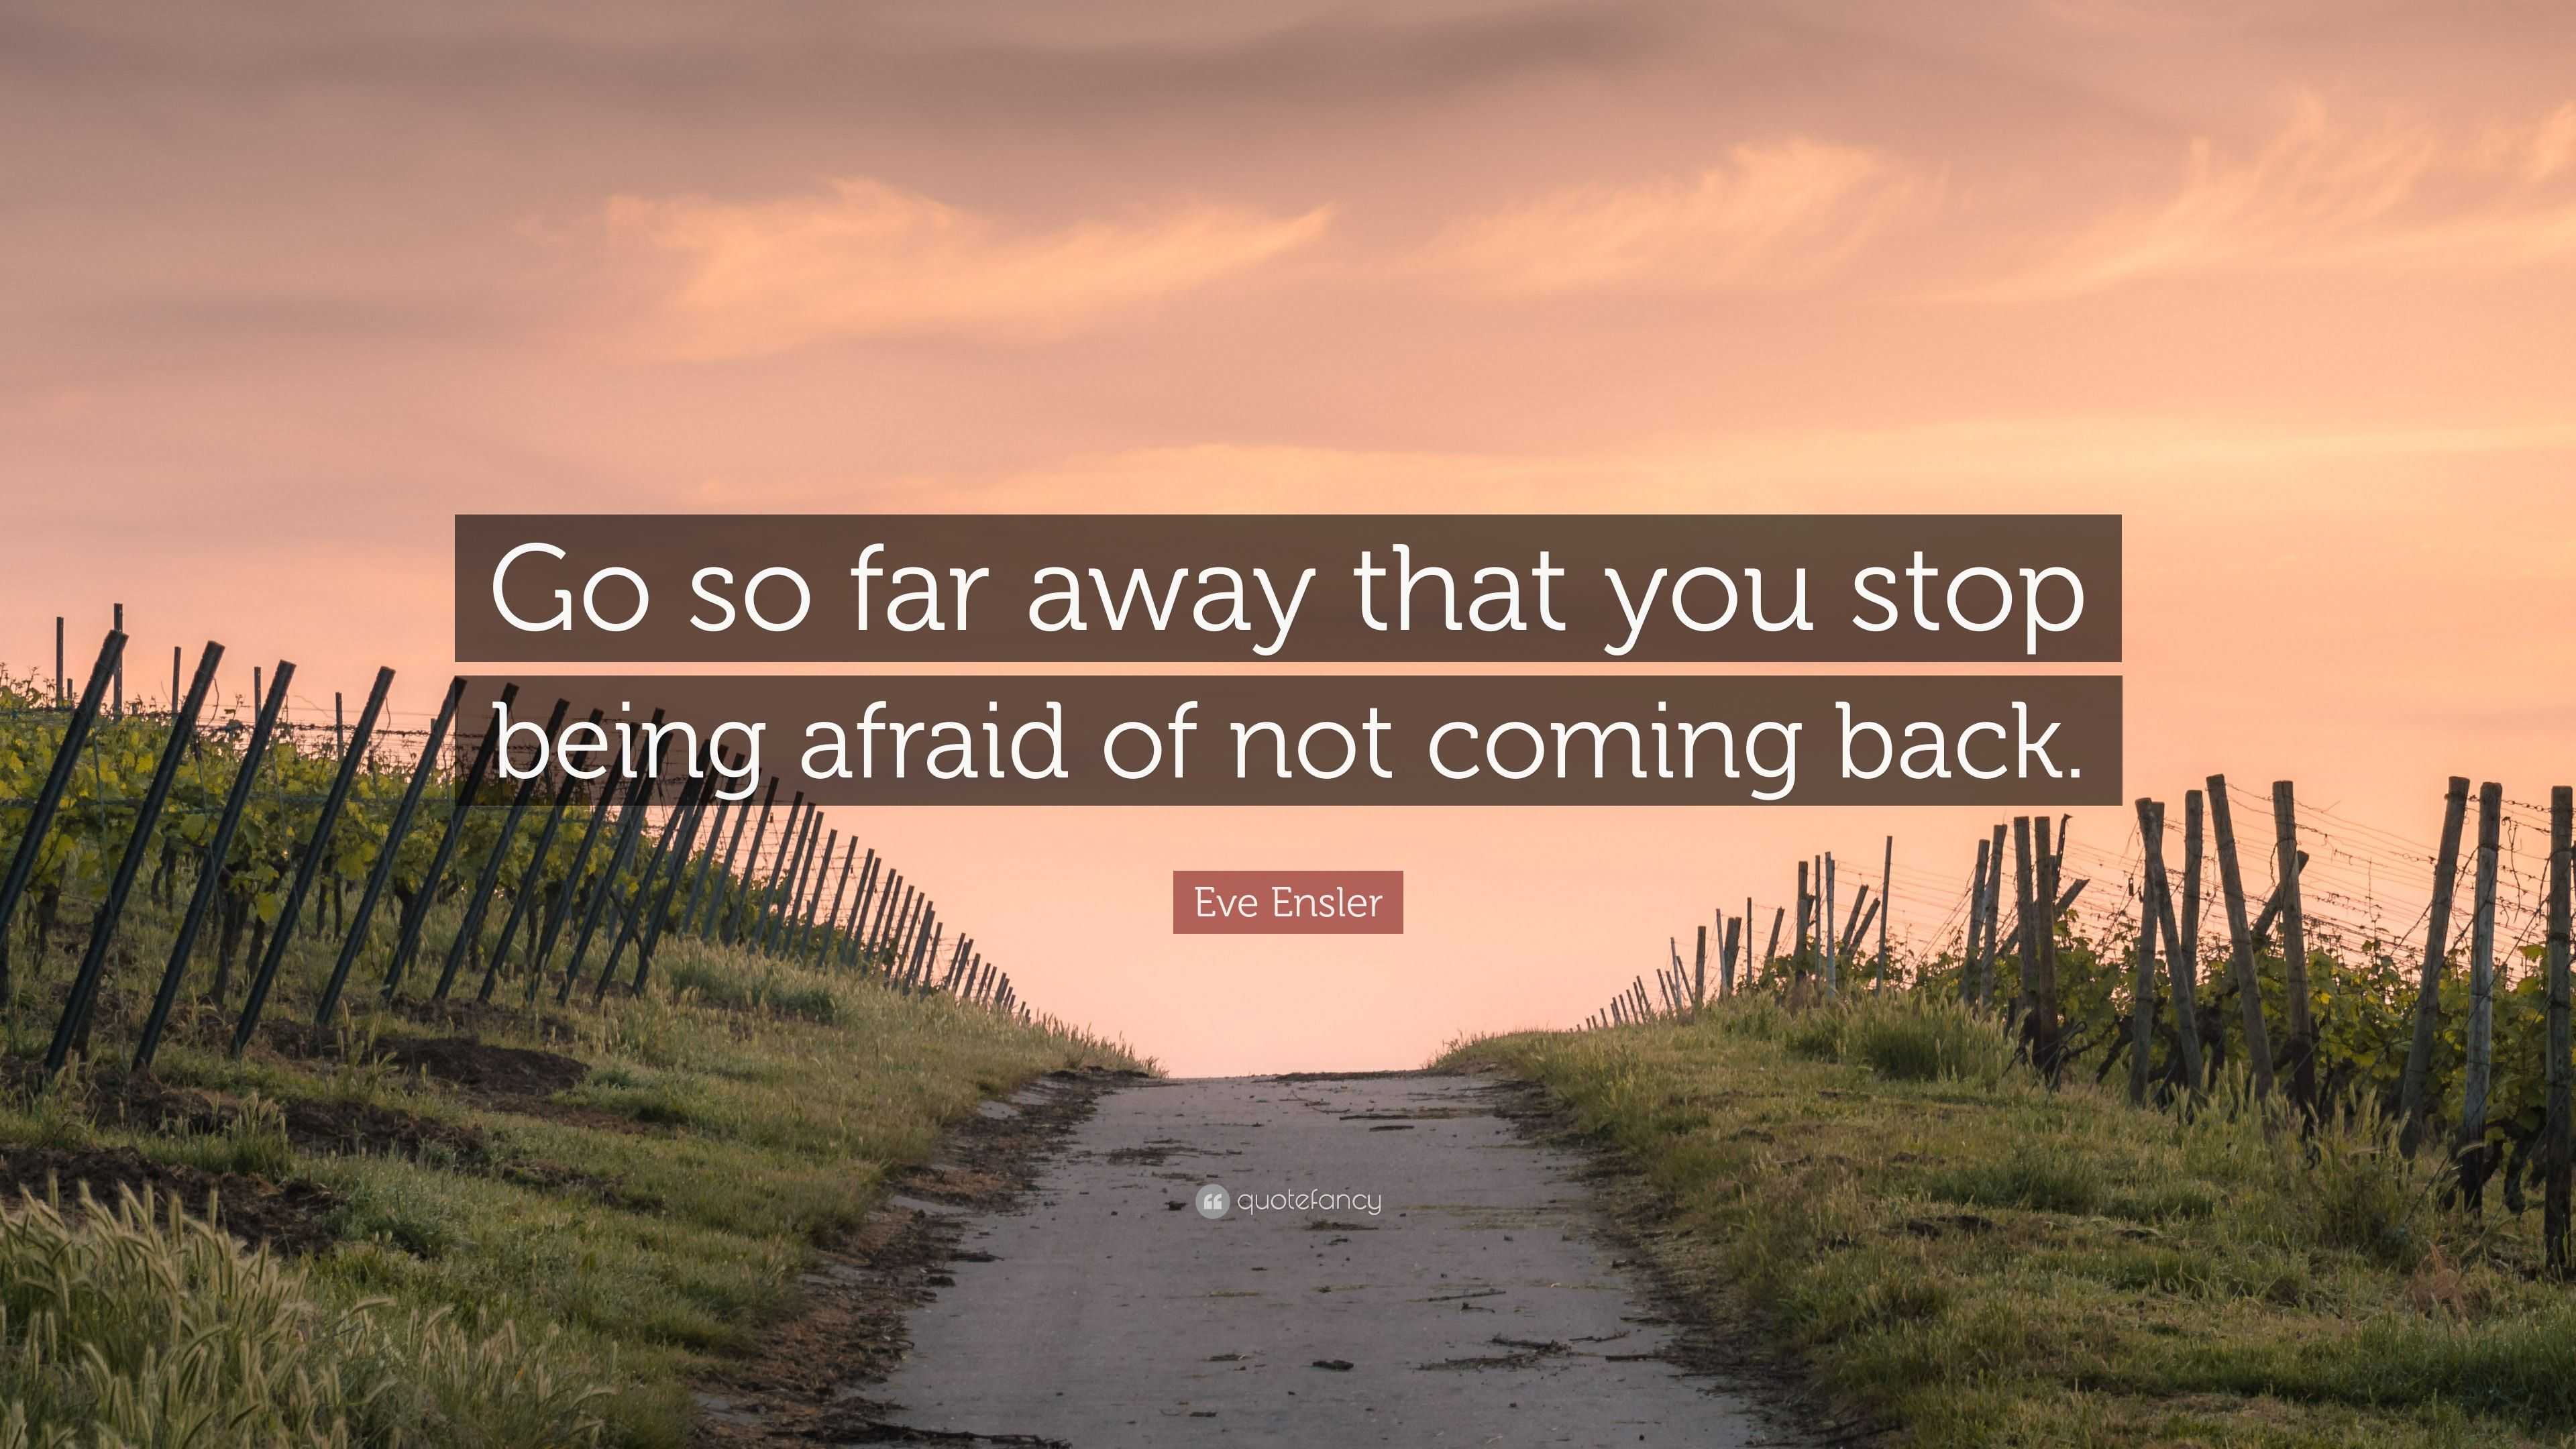 Far Away Quotes 35 Images Quotes About Running Far Away Quotes So Far Away Quotes Quotesgram So Far Away Quotes Quotesgram